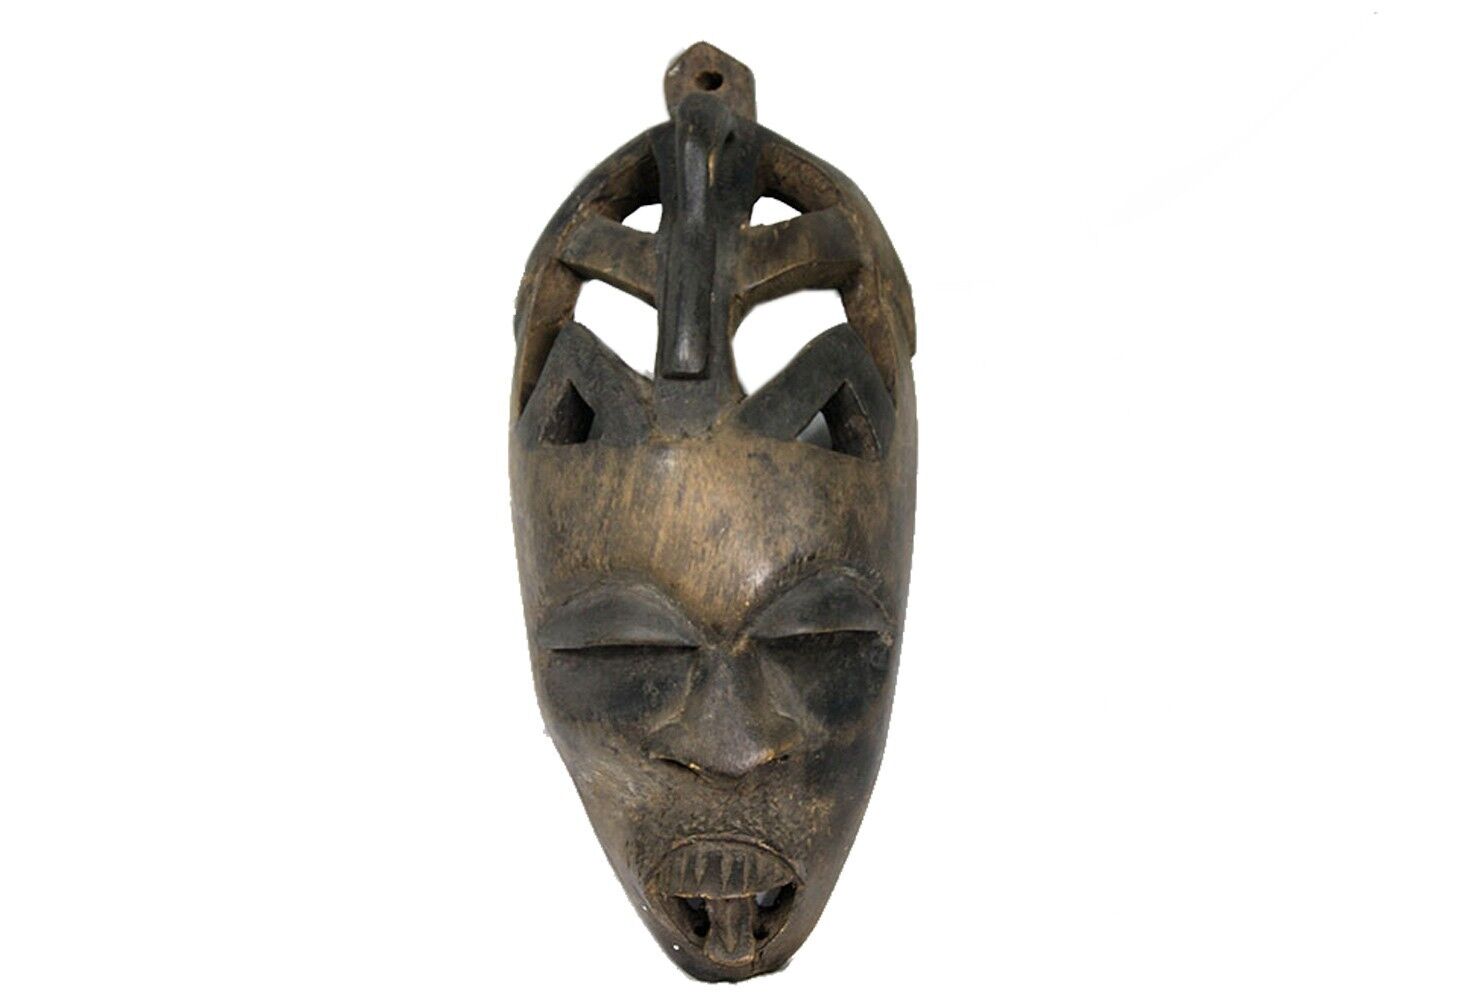 Mask - Ethnographic Art Object - Hand Carved Wood Mask - Material Culture